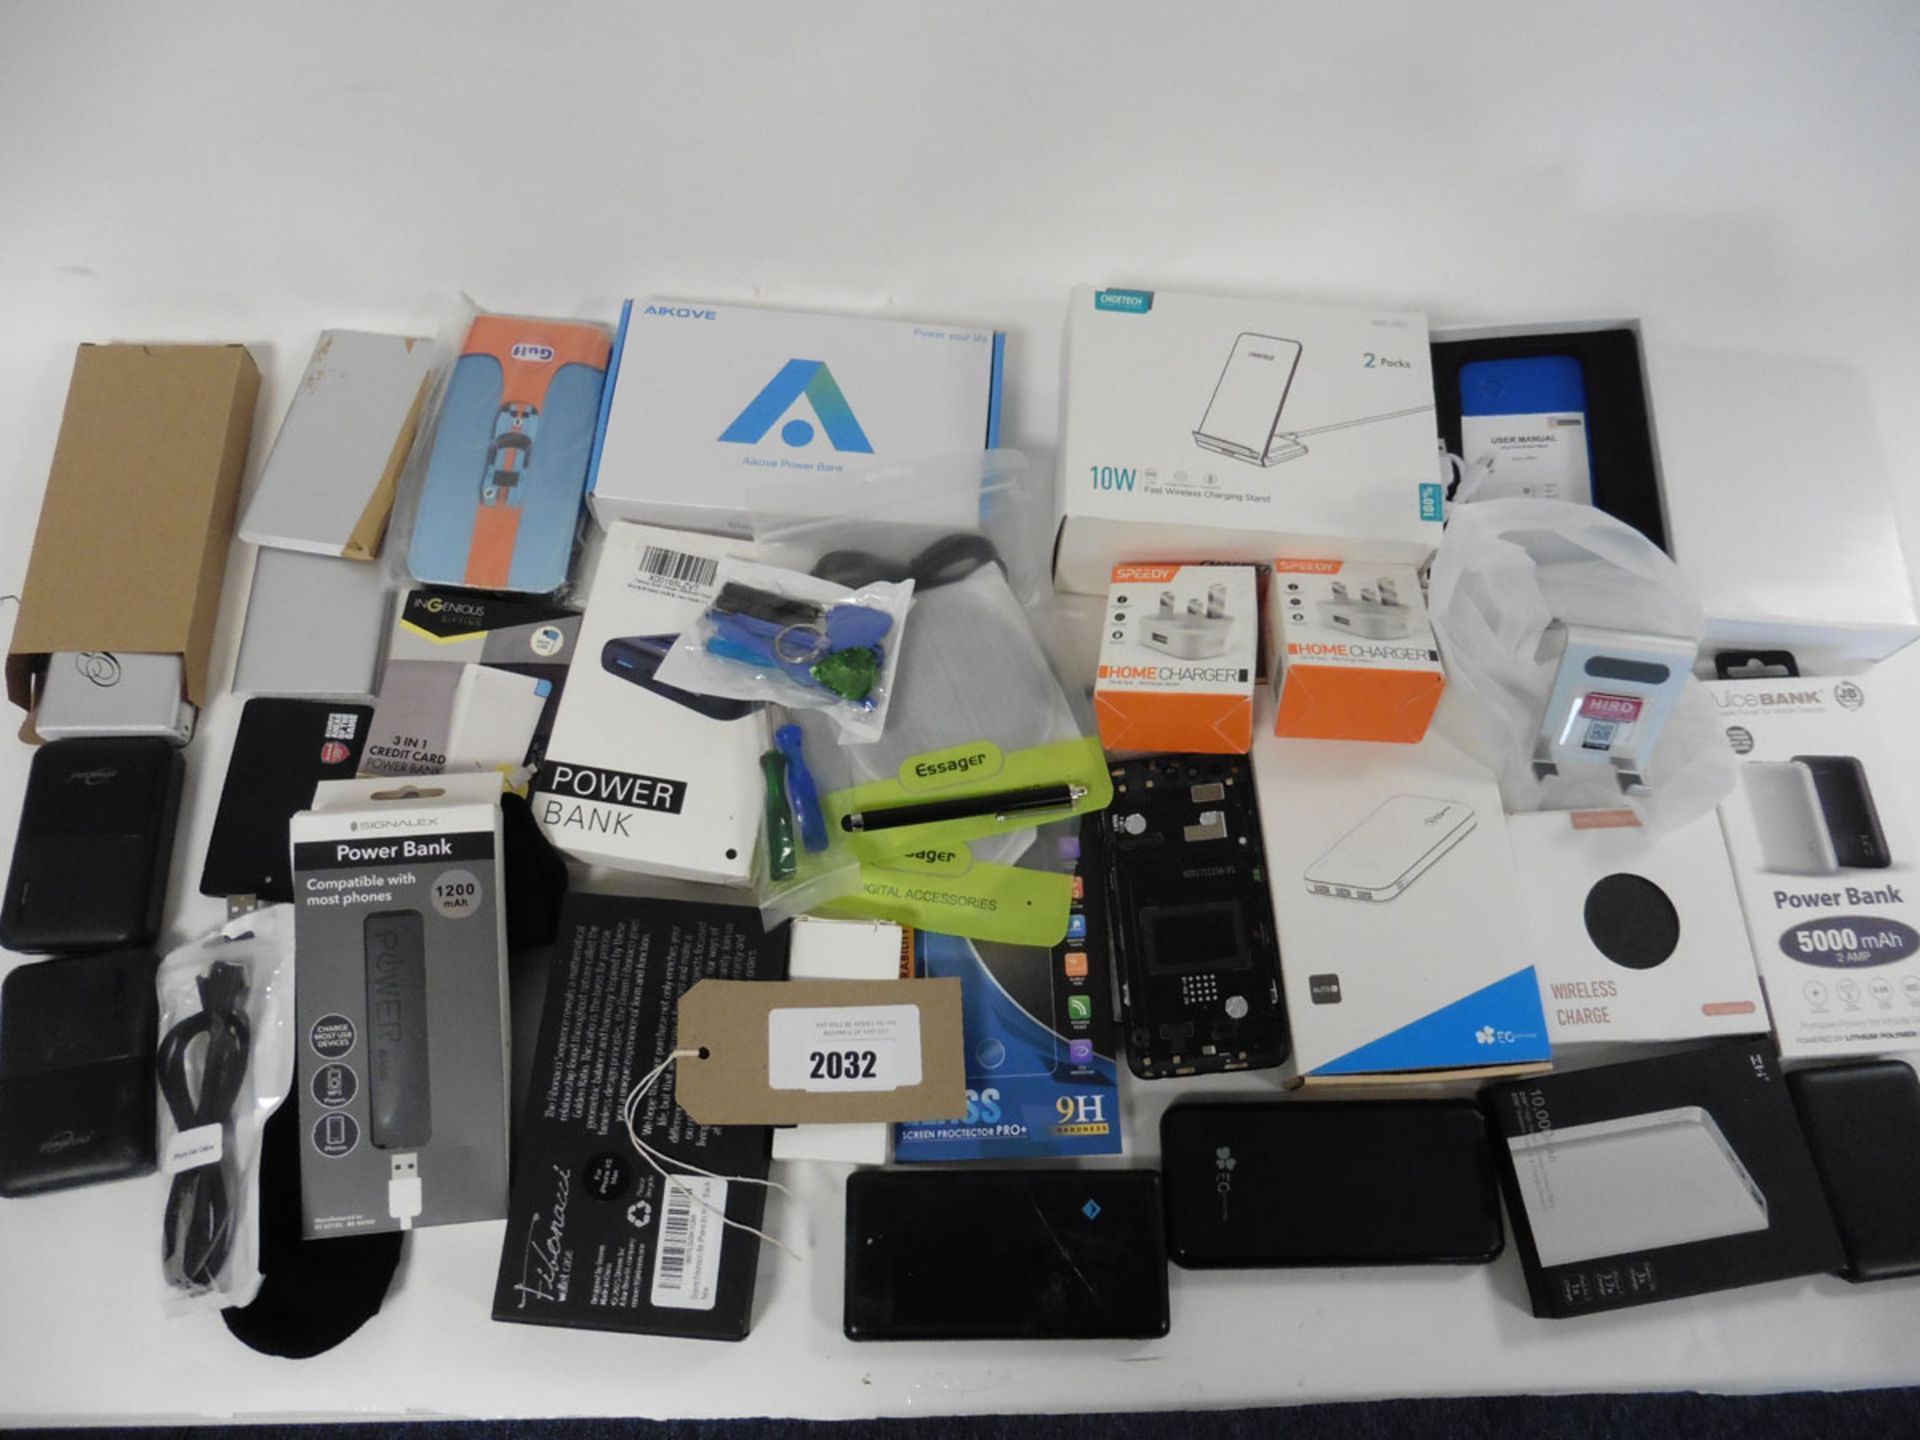 A bag of mobile phone accessories, chargers, power banks cases, screen protectors etc